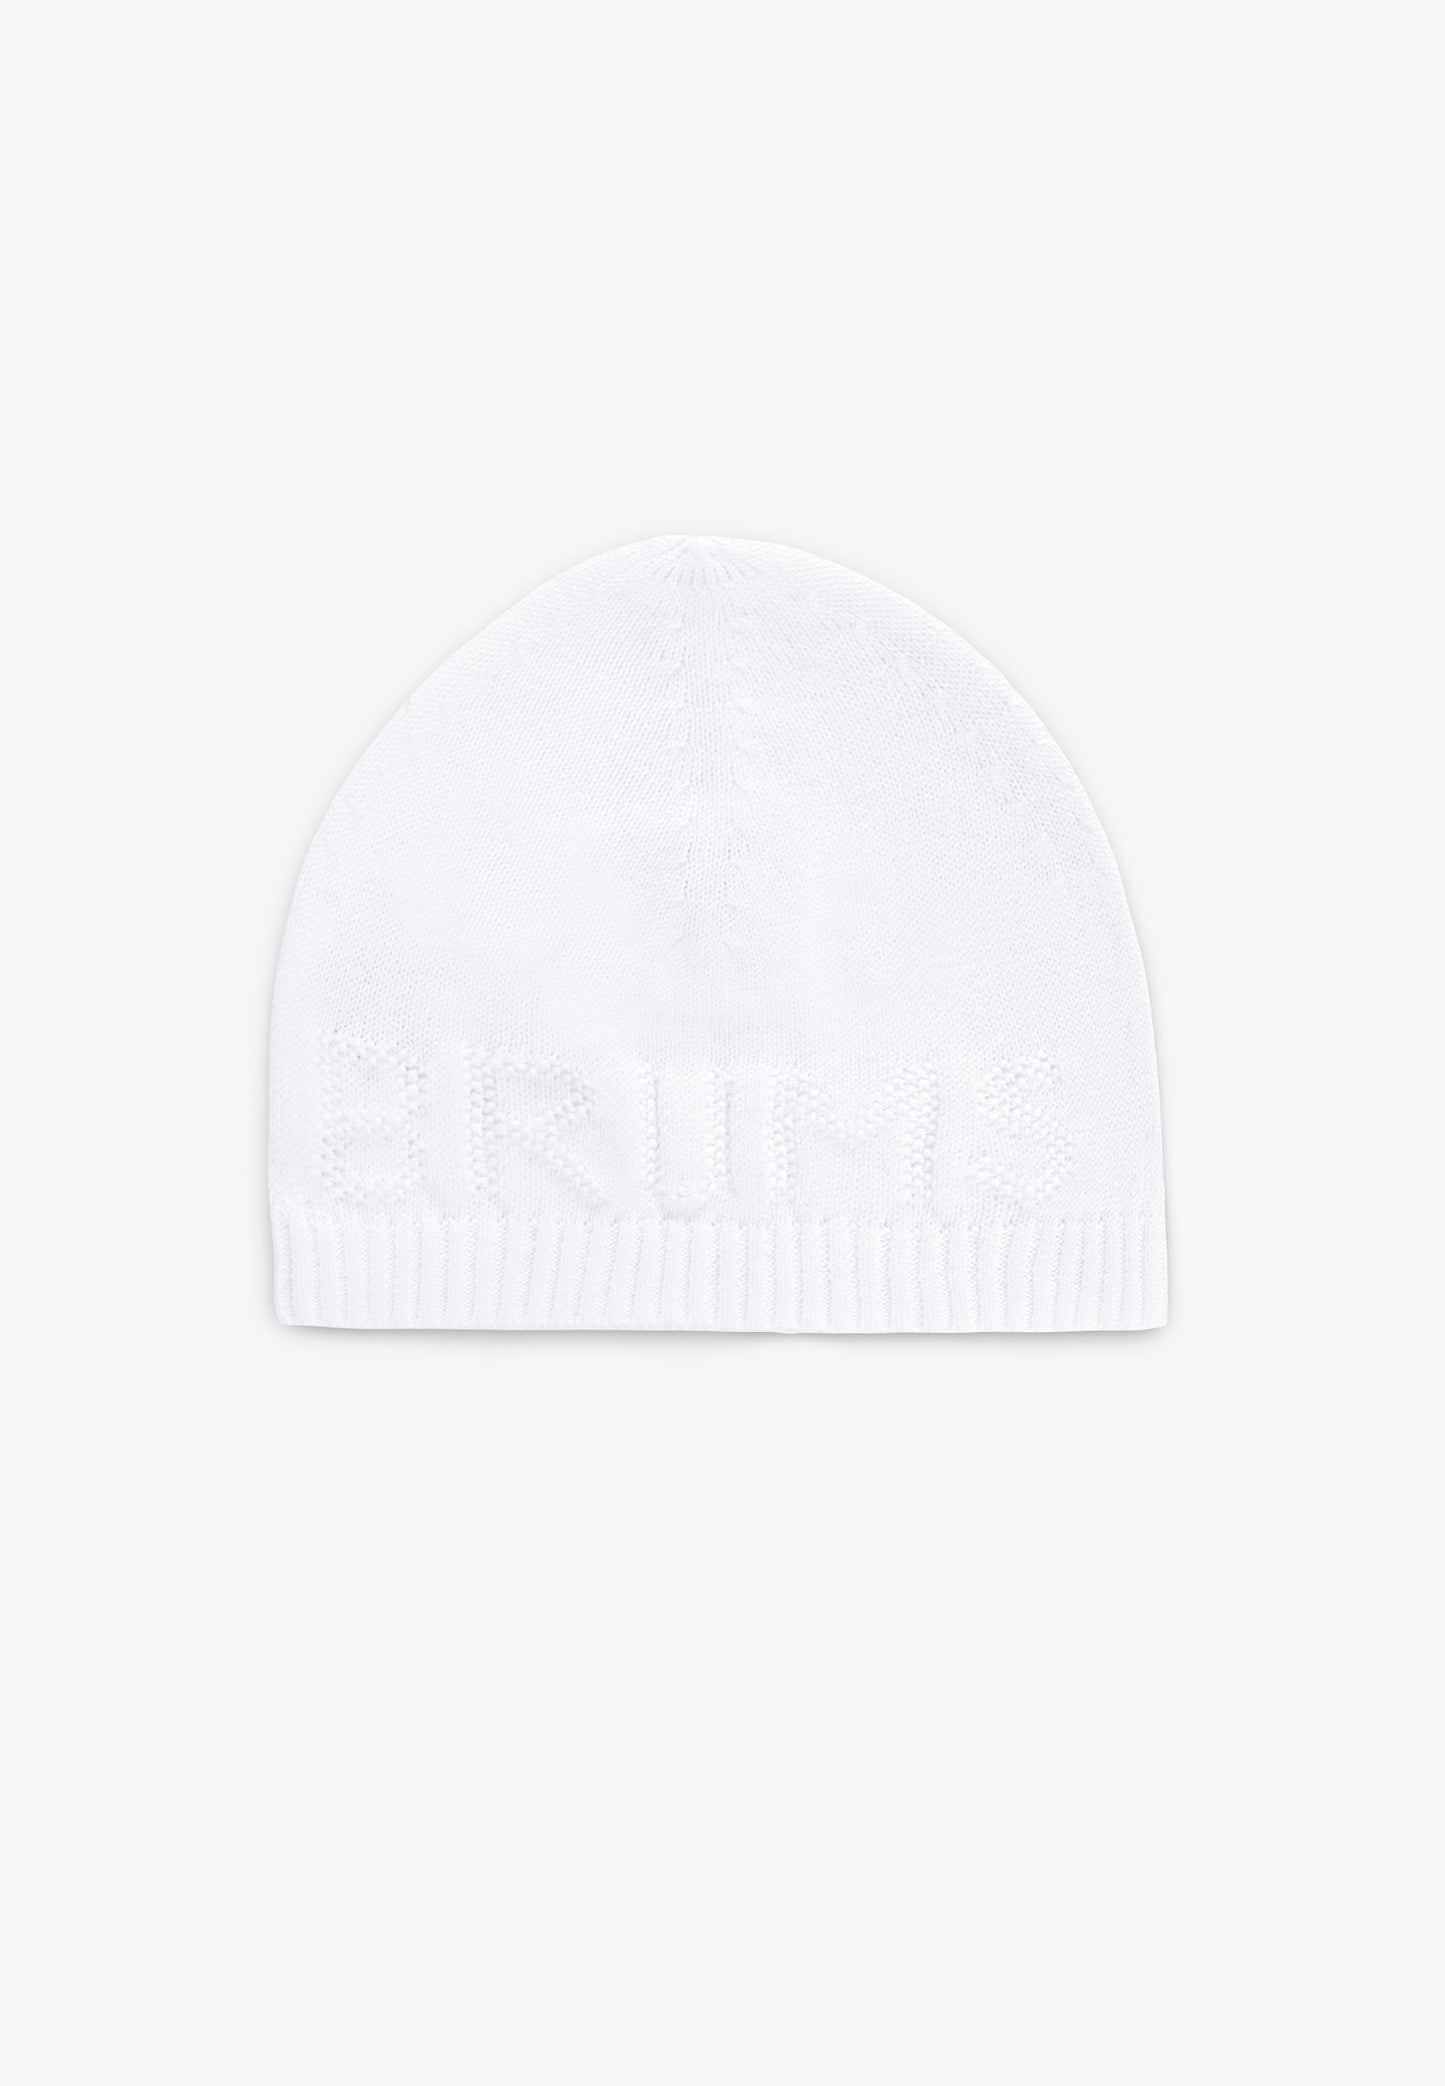 Jacquard Tricot Cap with "Brums" Writing